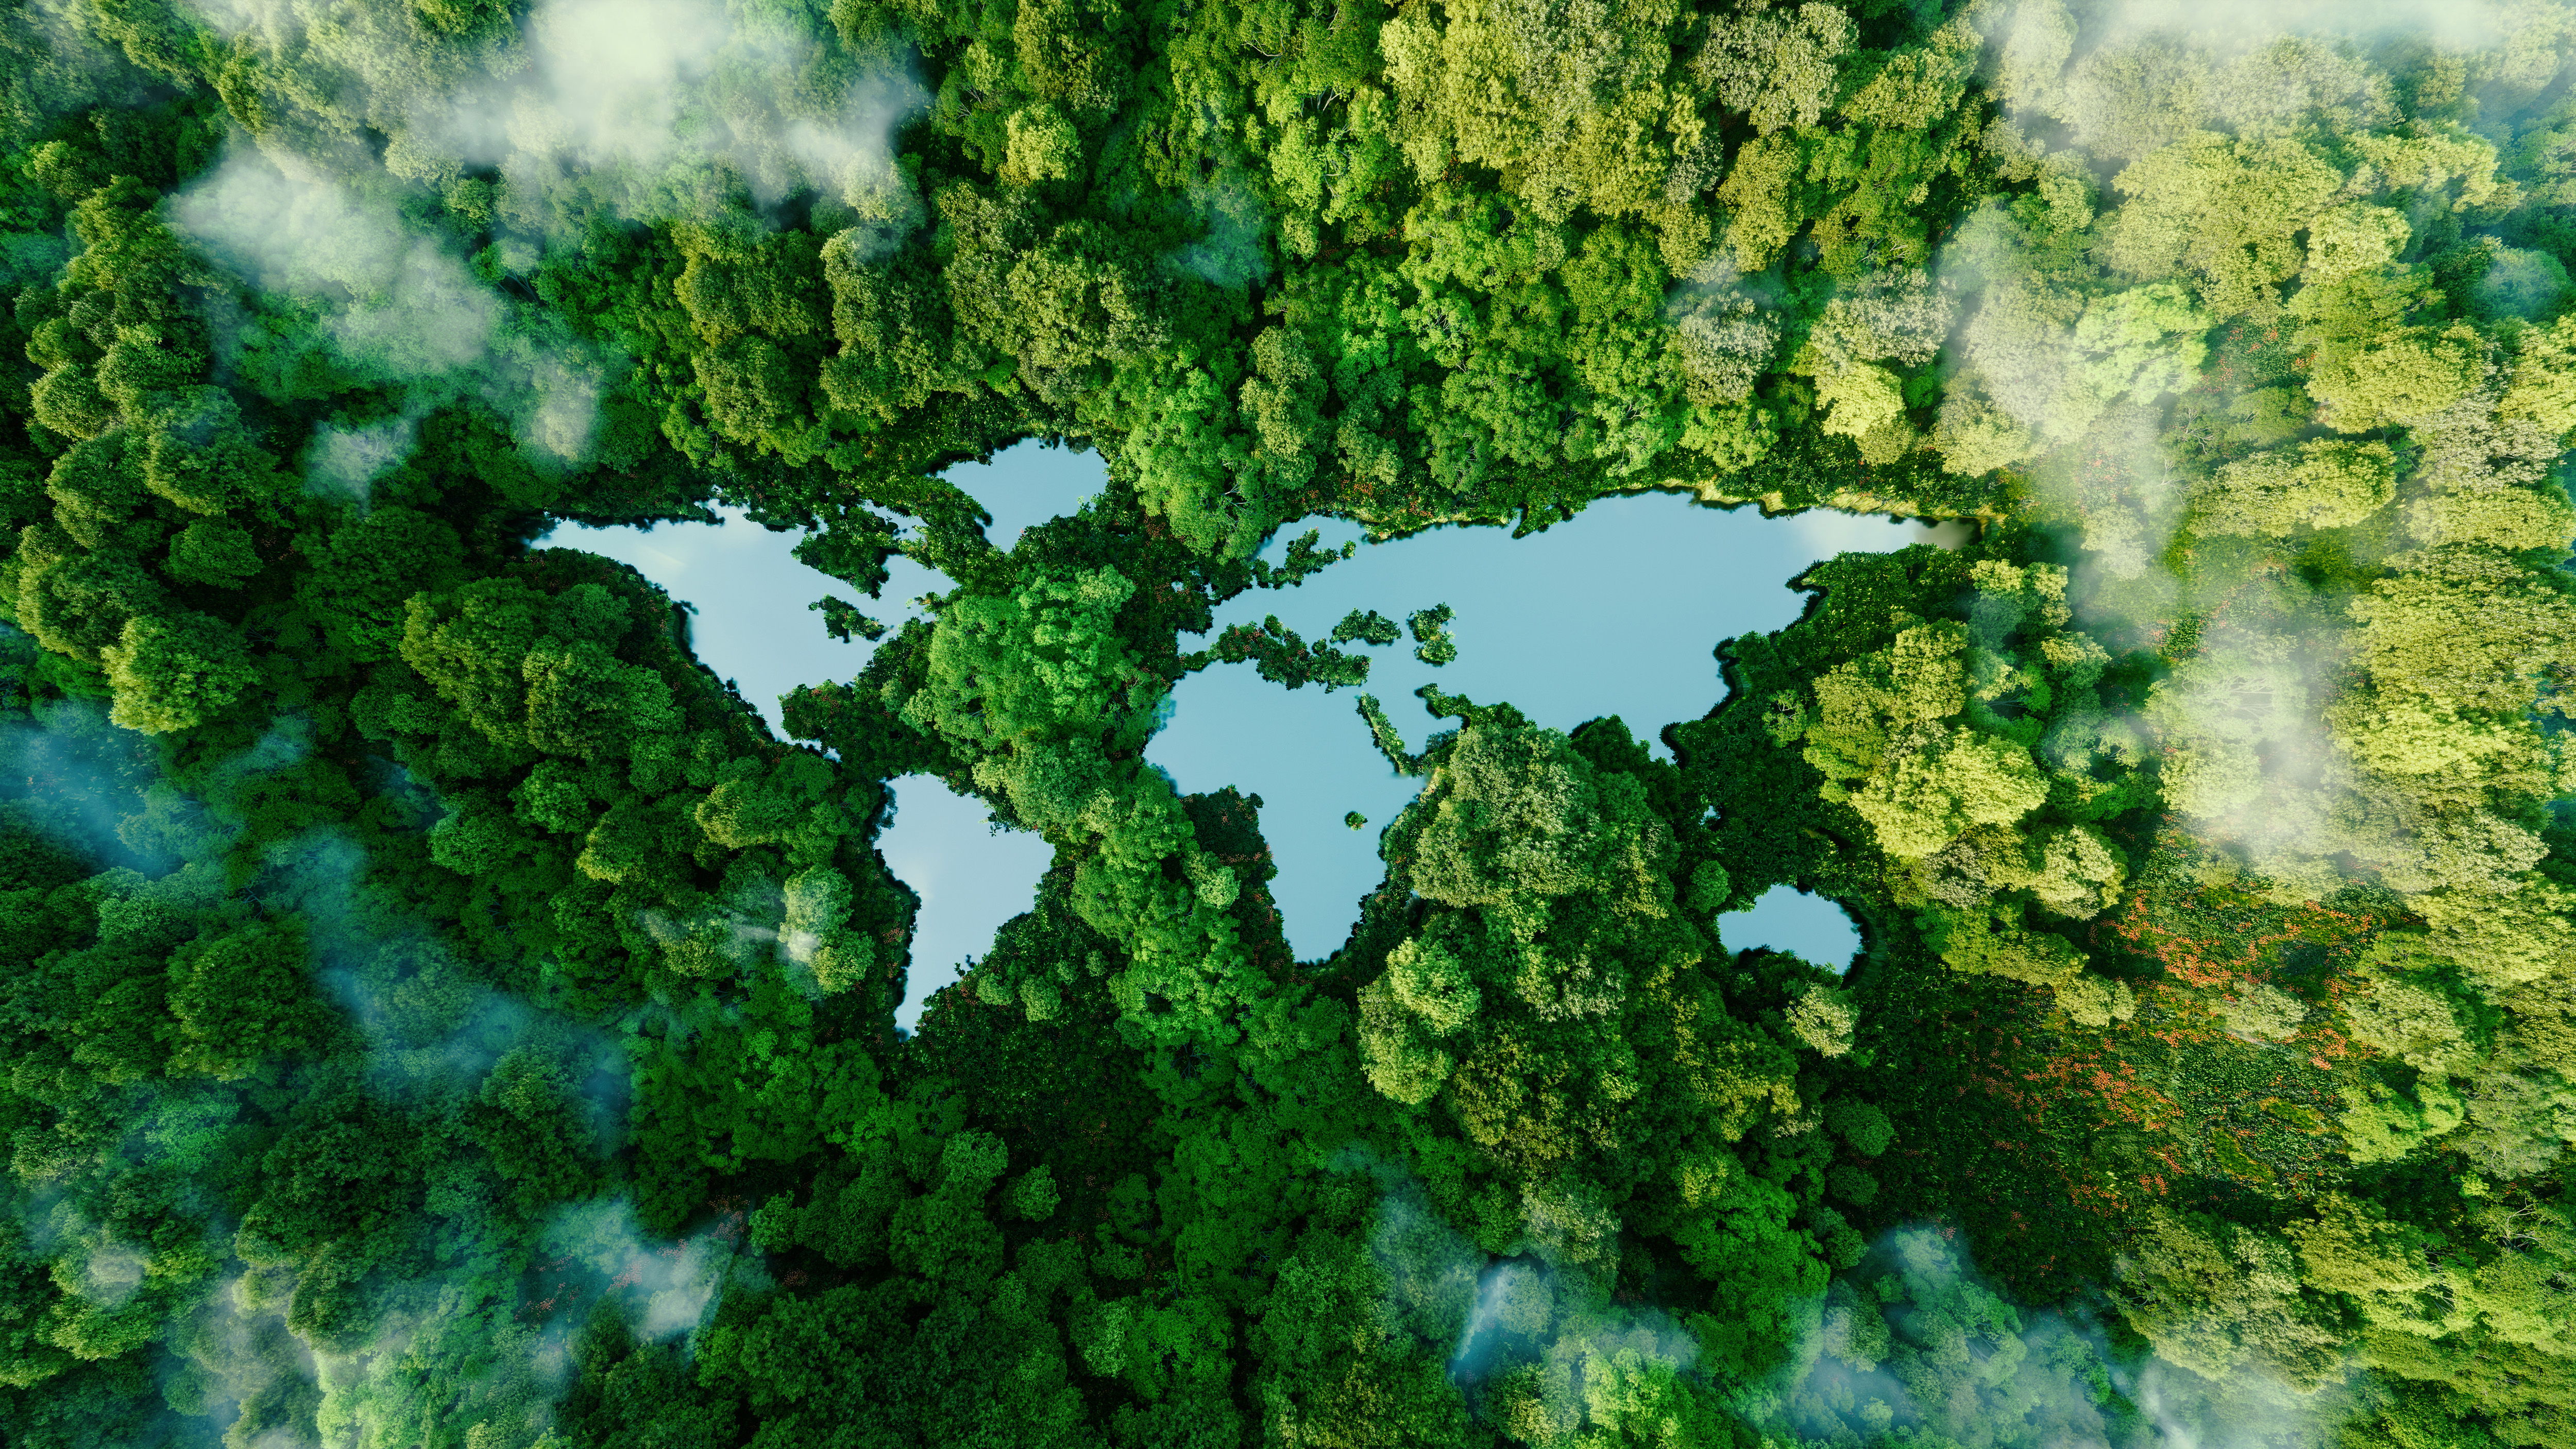 Photo illustration of a world map depicted by water and trees